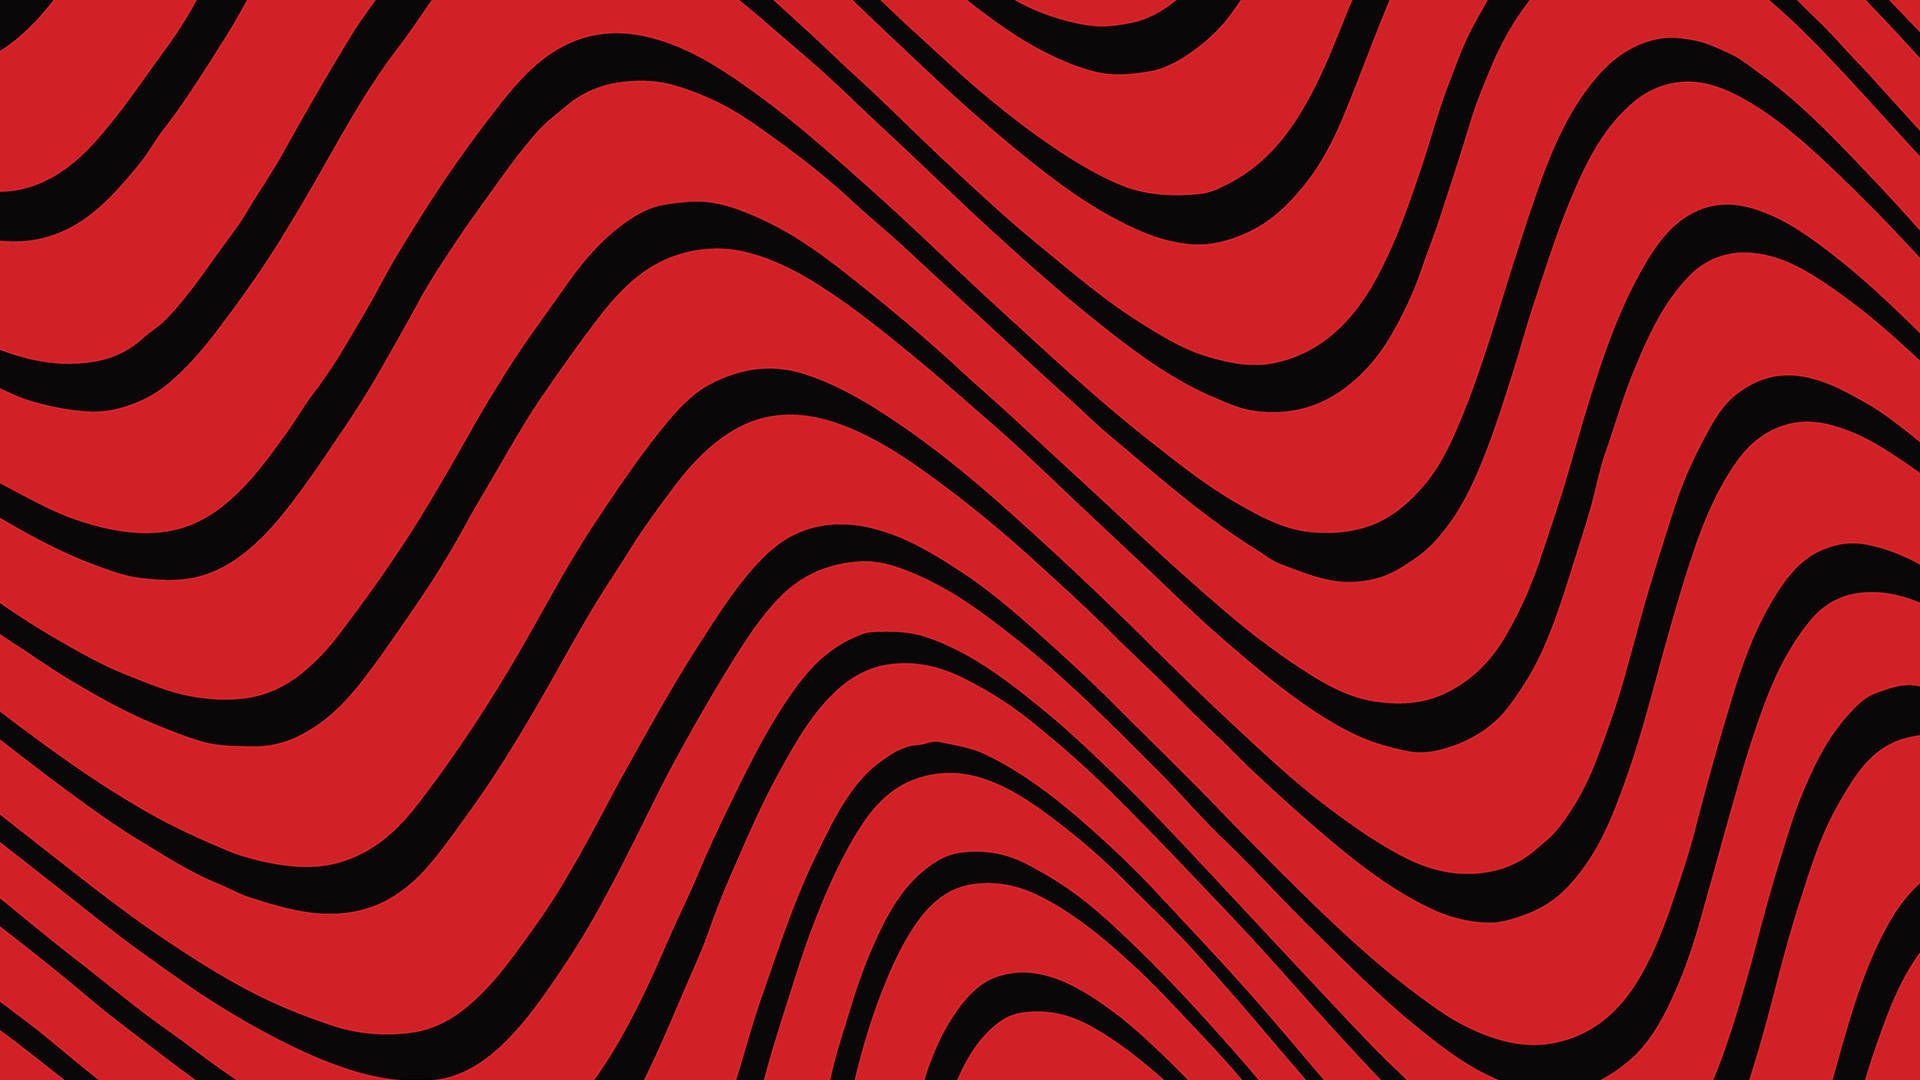 “The one and only Pewdiepie looking stylish in light red waves” Wallpaper